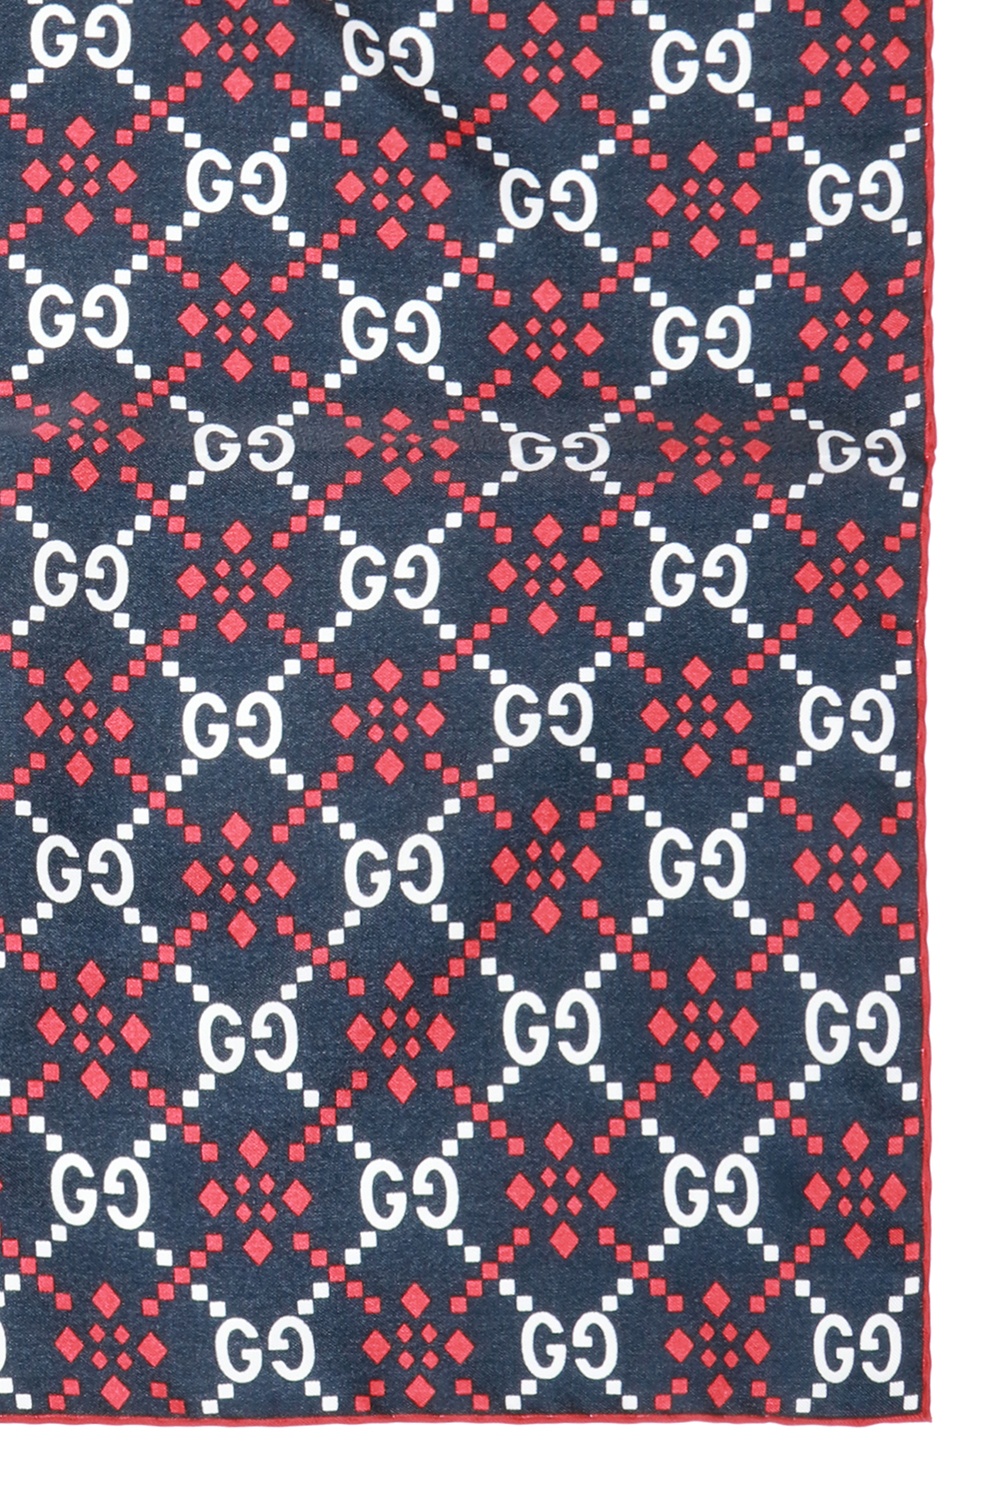 Gucci Patterned pocket square with logo, Men's Accessories